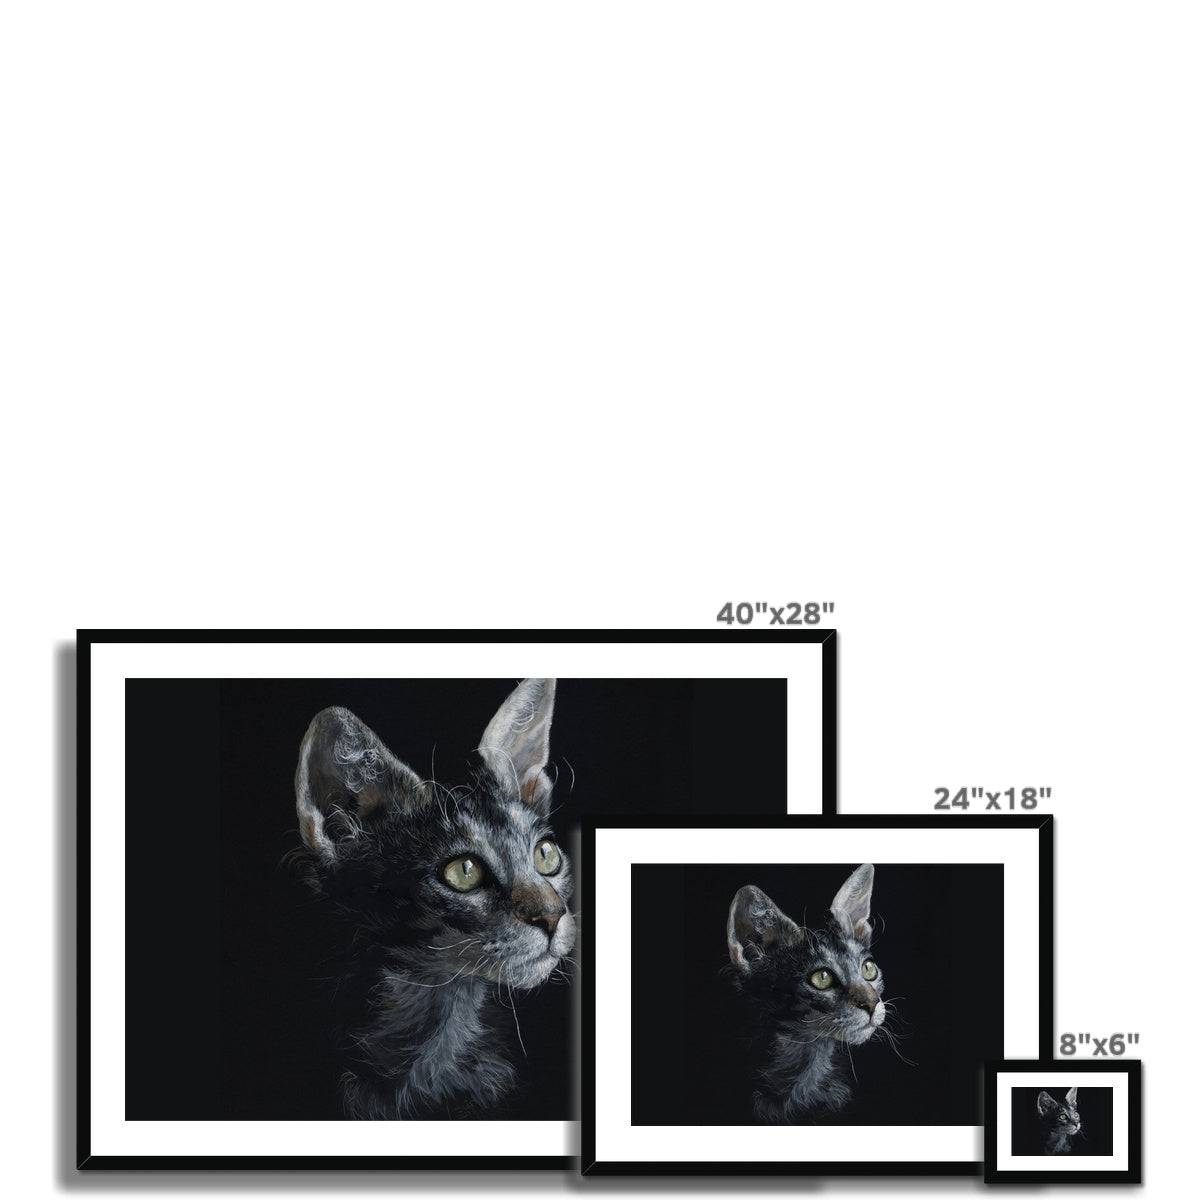 LaPerm Cat Framed & Mounted Print